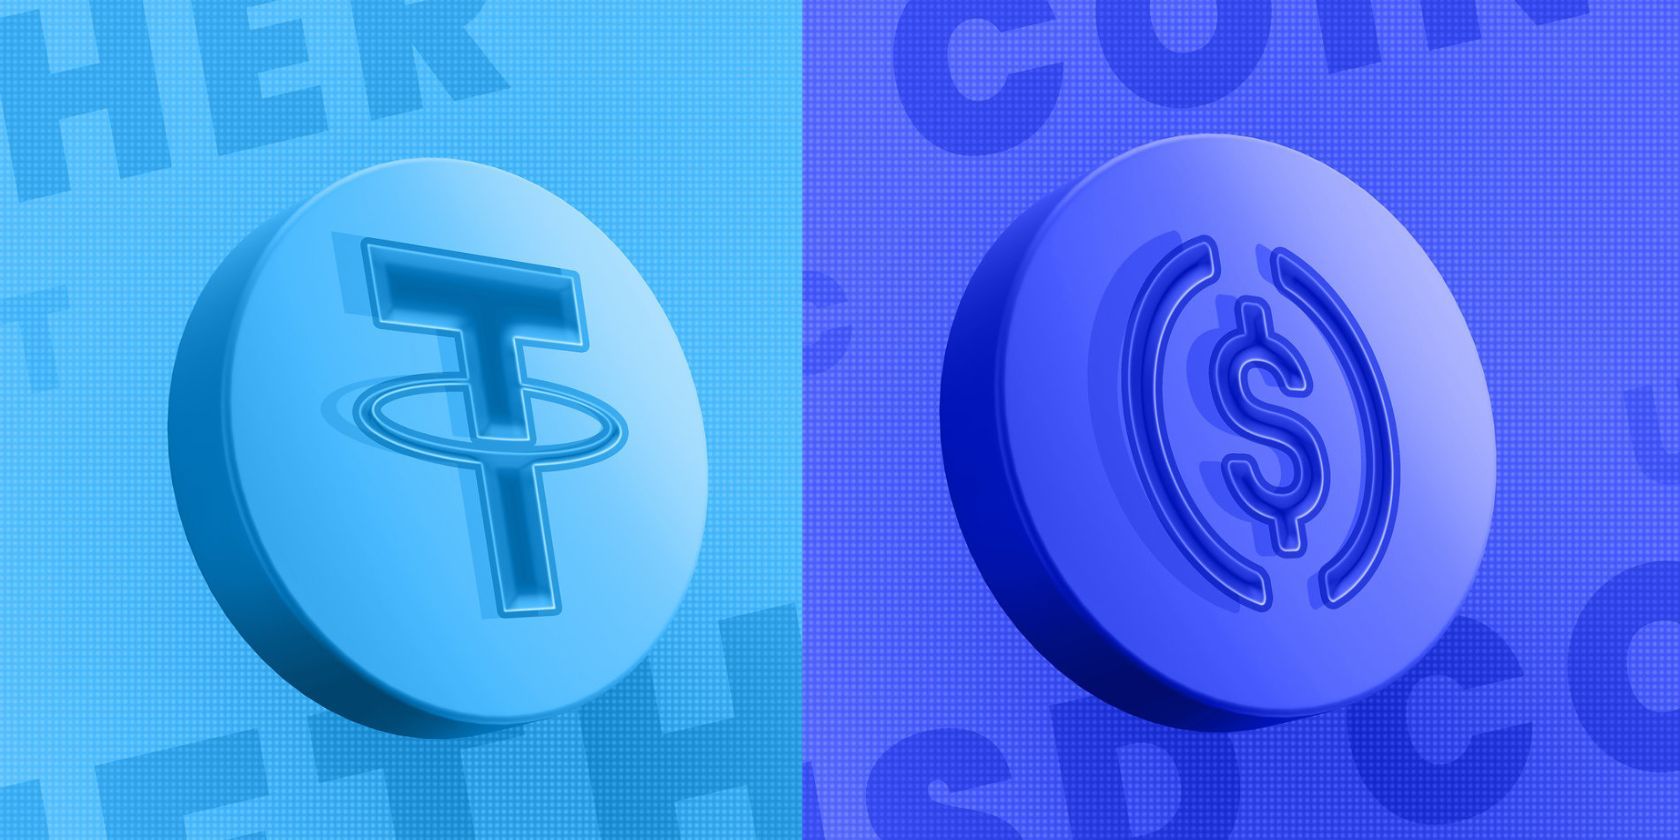 split image of tether and usd coin charts